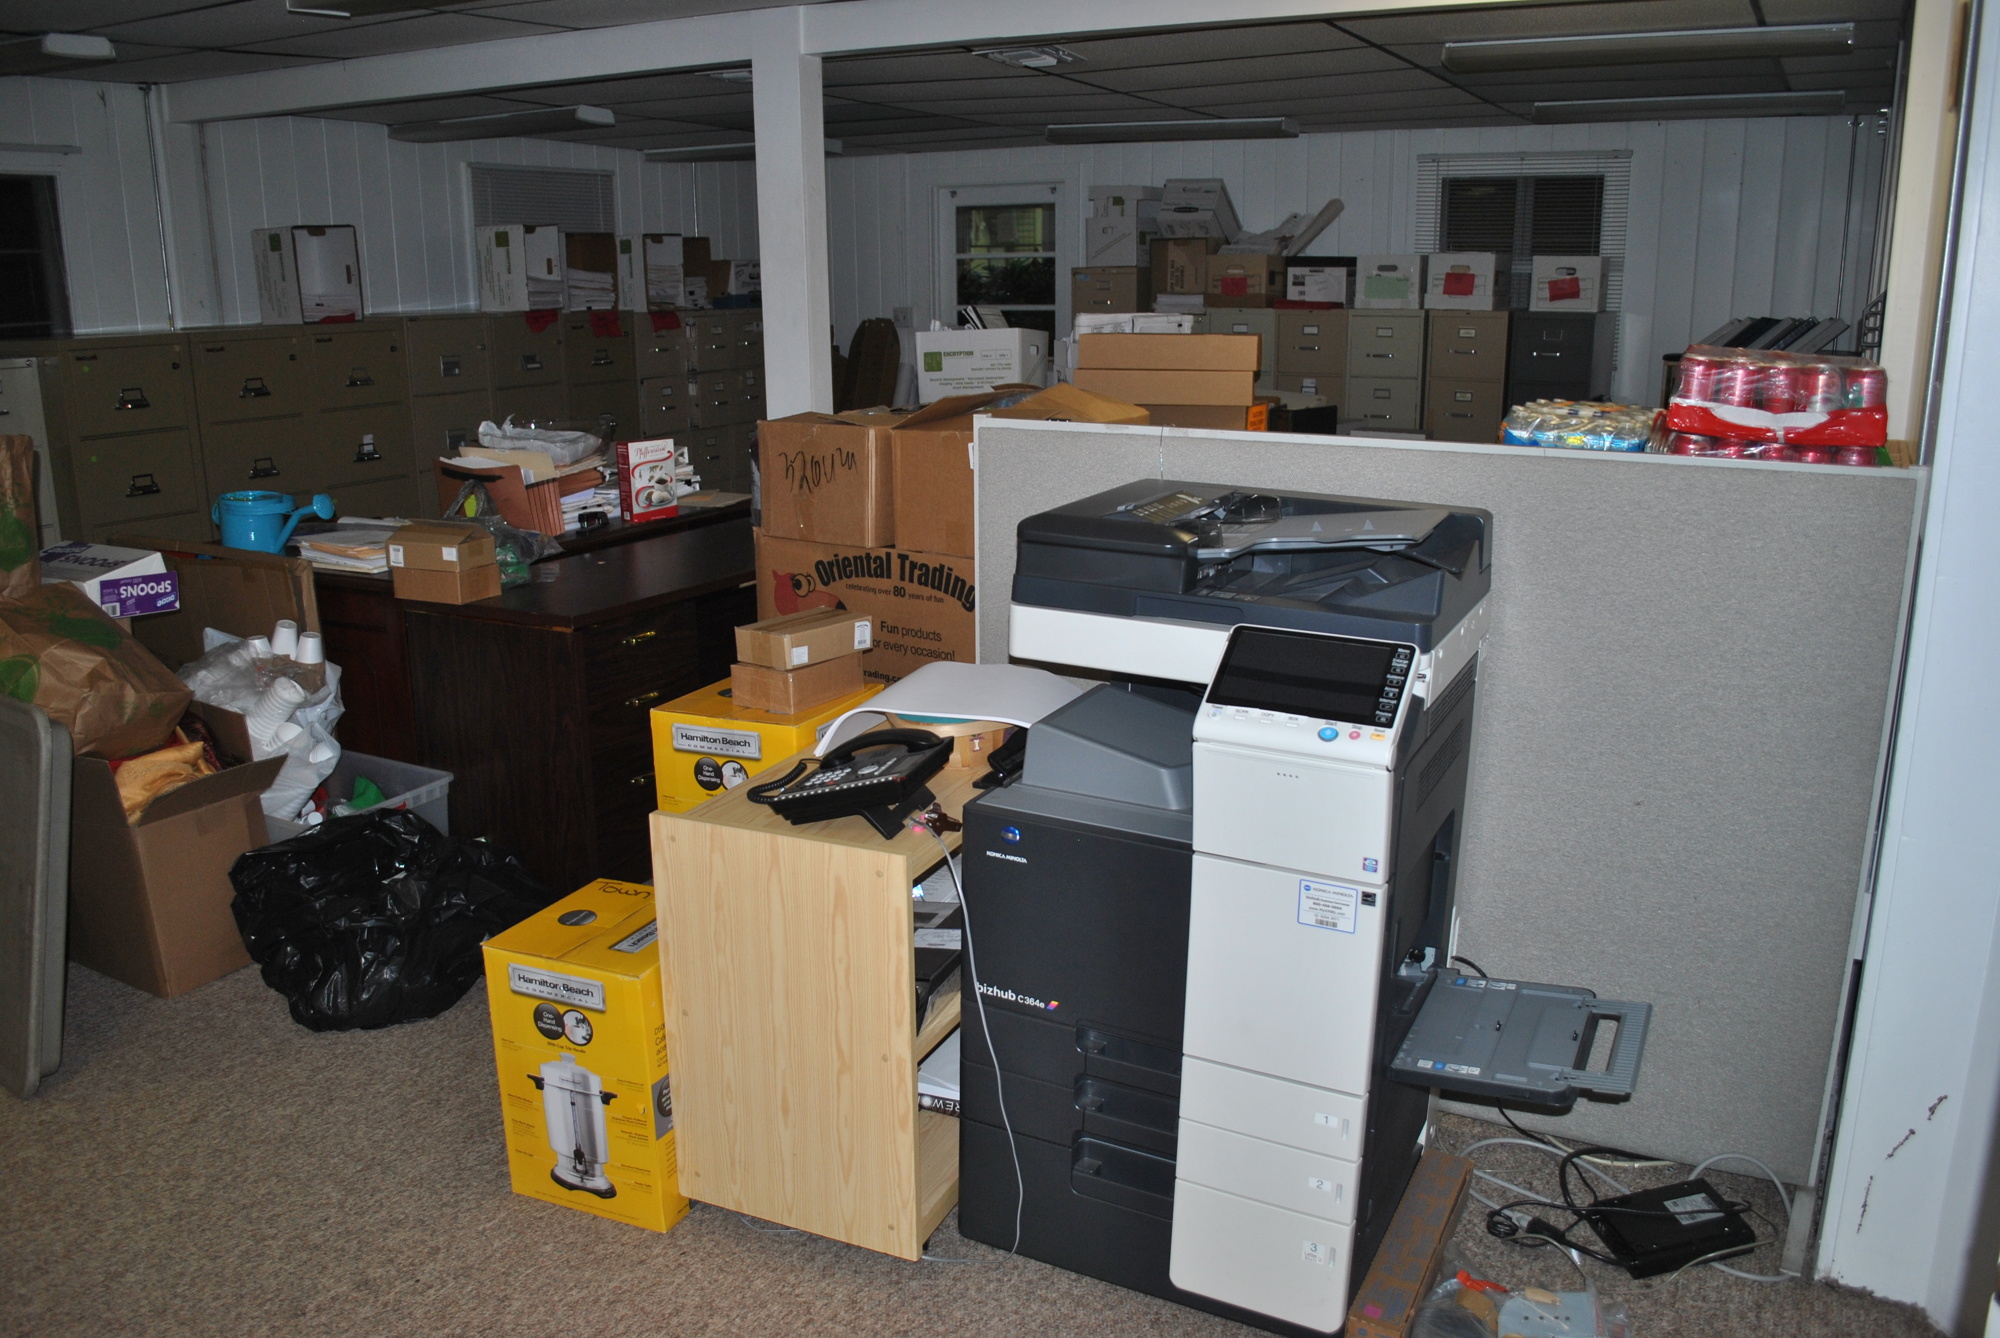 This infested room features administrative office space, miscellaneous storage and file storage.